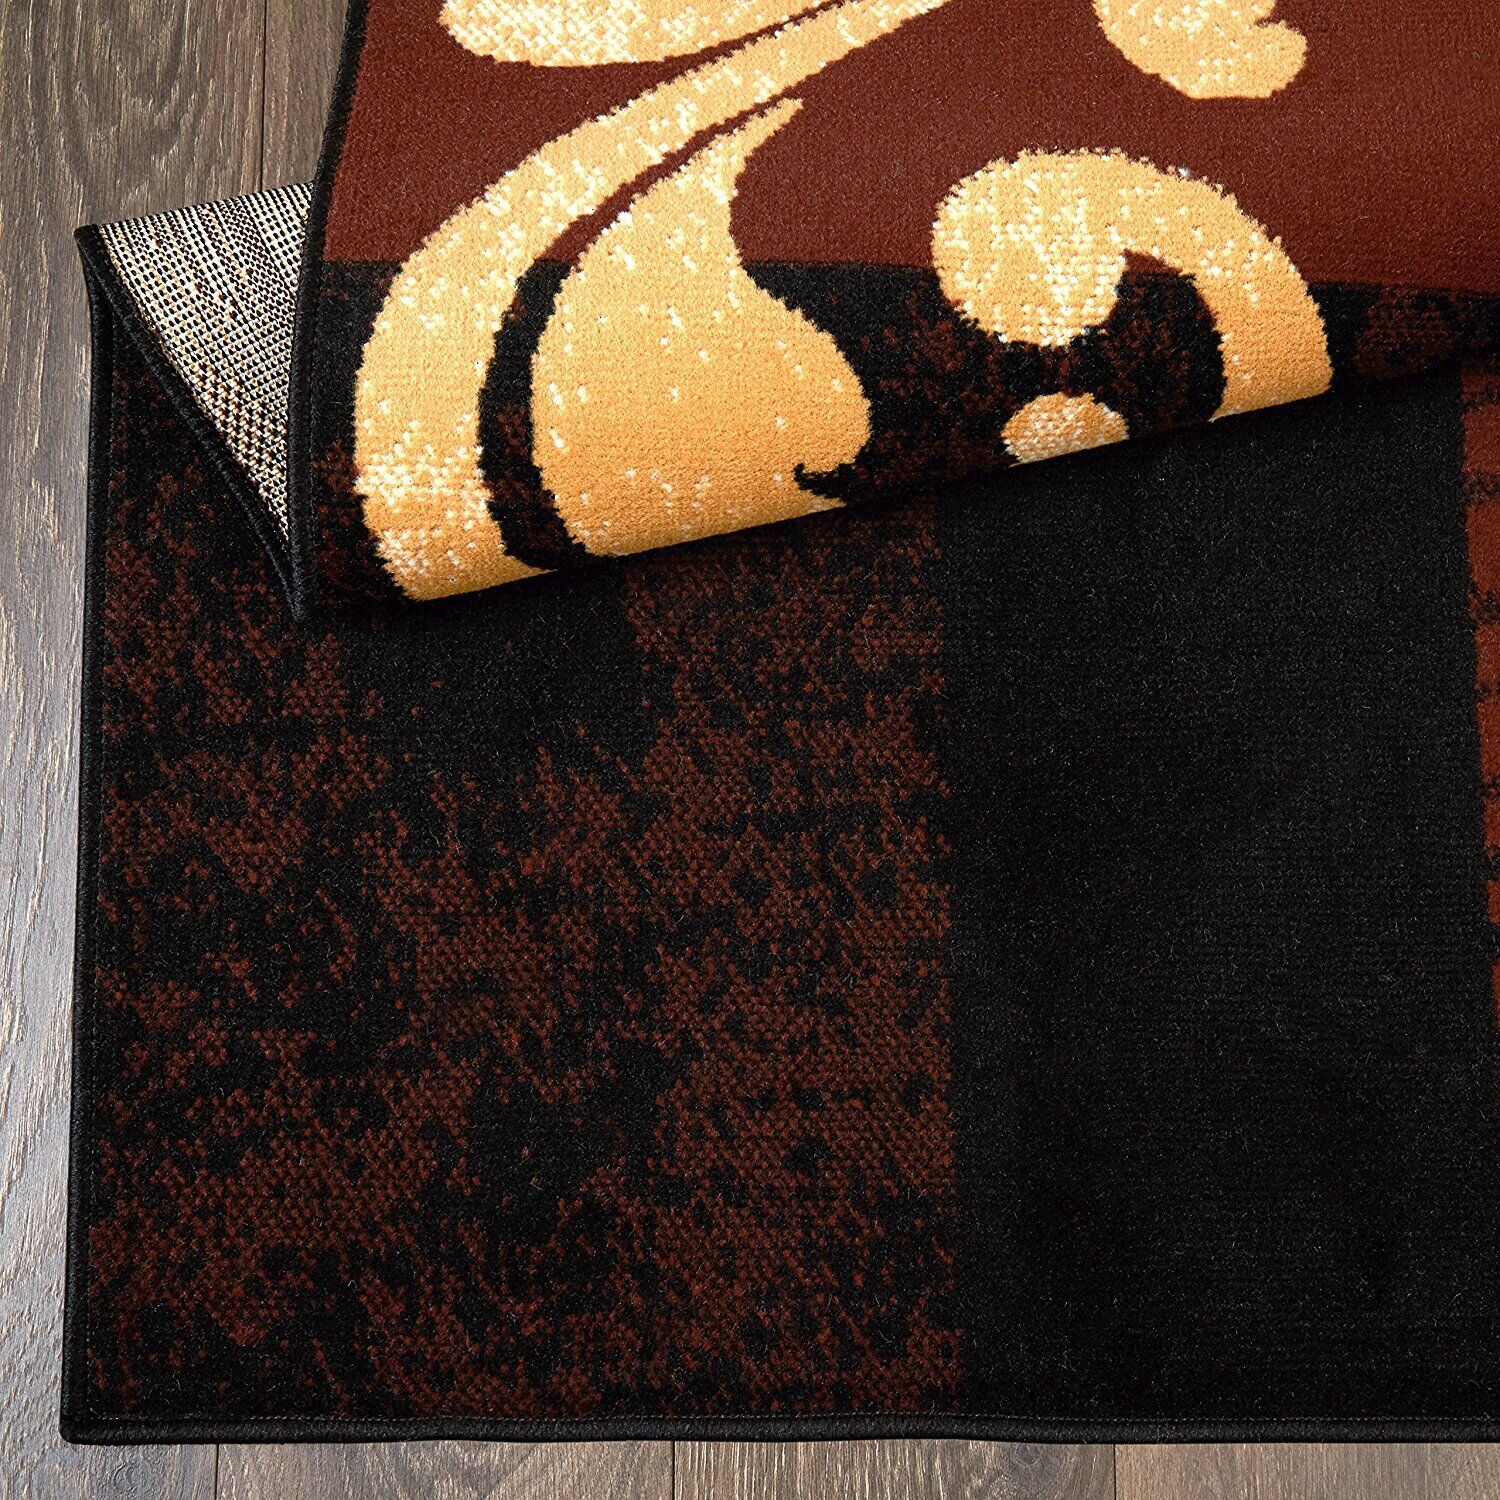 Black Brown Gold Scroll 3 pc Area Rug Set Accent Mat Carpet Runner 5 x 7 ft 2x3 Unknown Does Not Apply - фотография #4